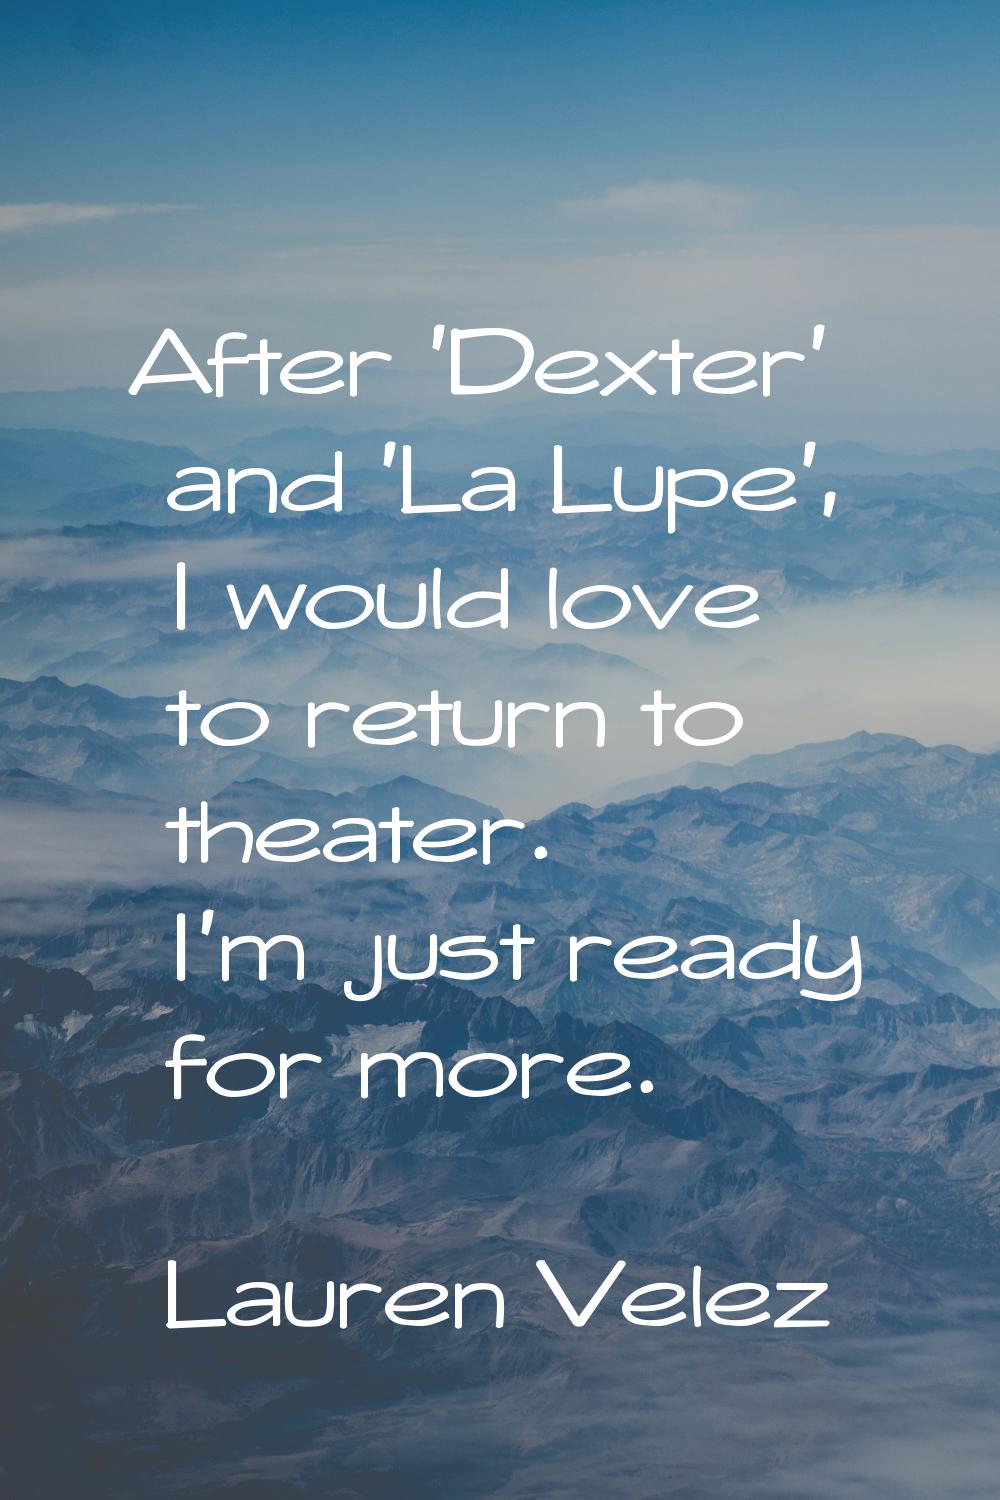 After 'Dexter' and 'La Lupe', I would love to return to theater. I'm just ready for more.